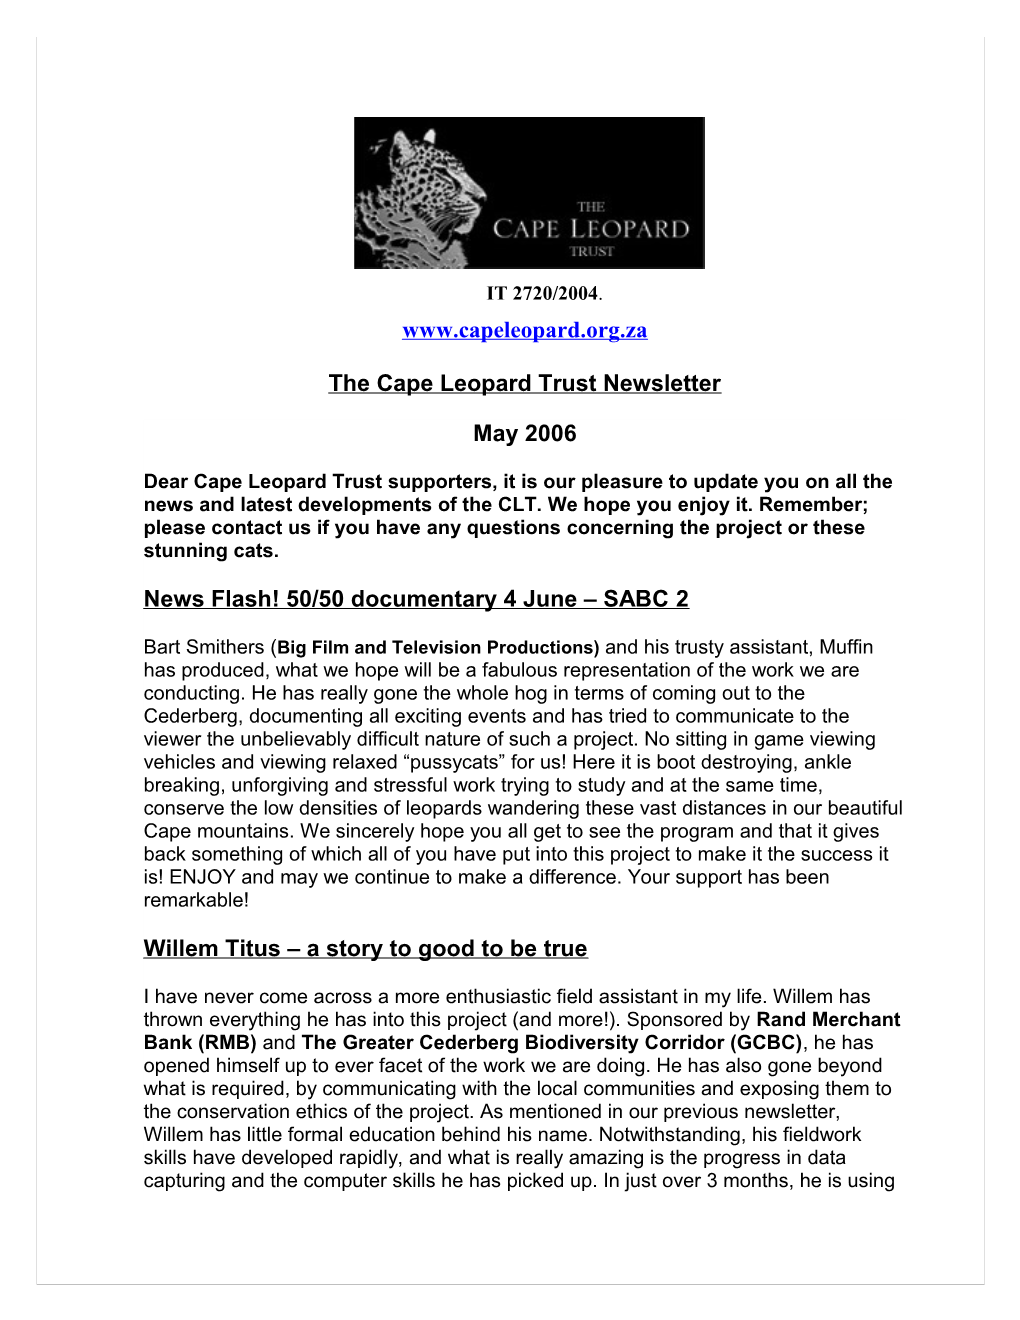 The Cape Leopard Trust Newsletter